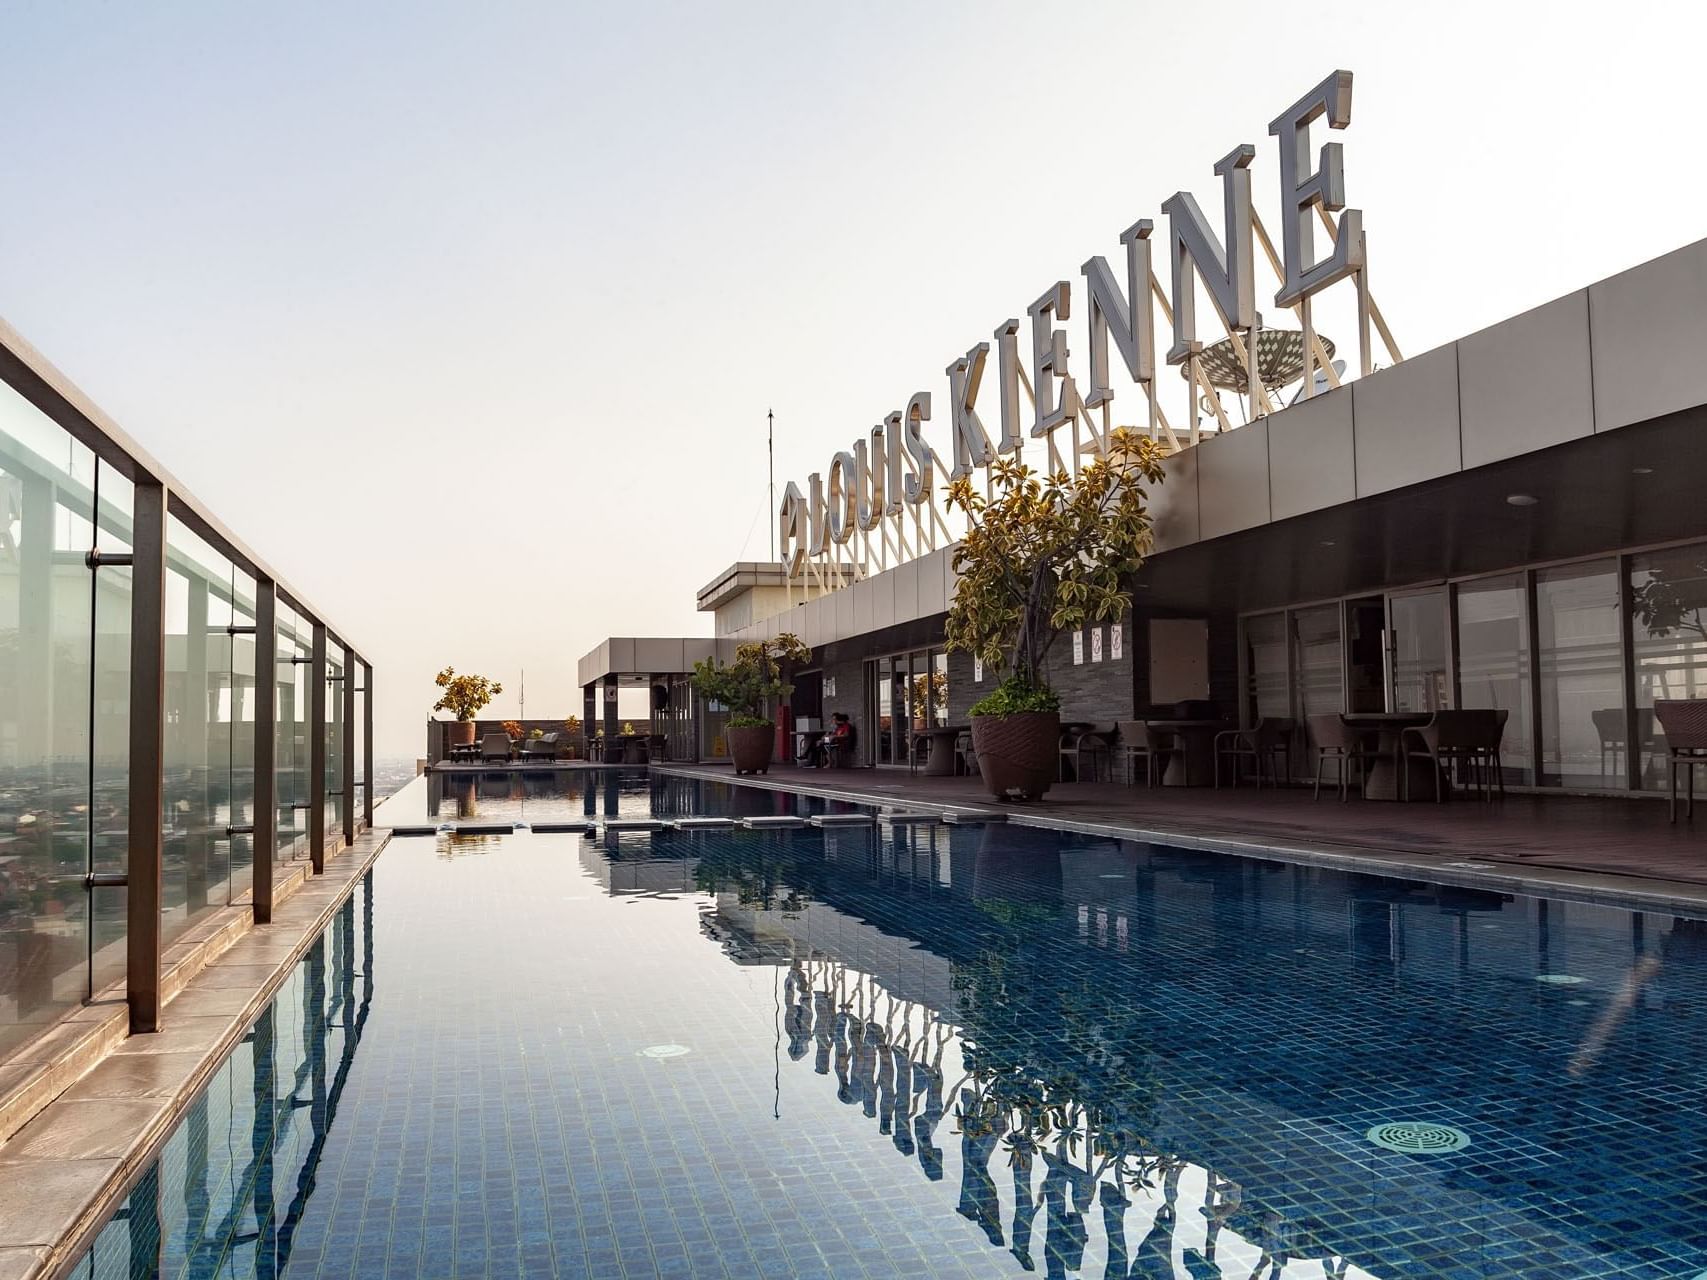 Rooftop pool area with a hotel sign at LK Hotel Simpang Lima